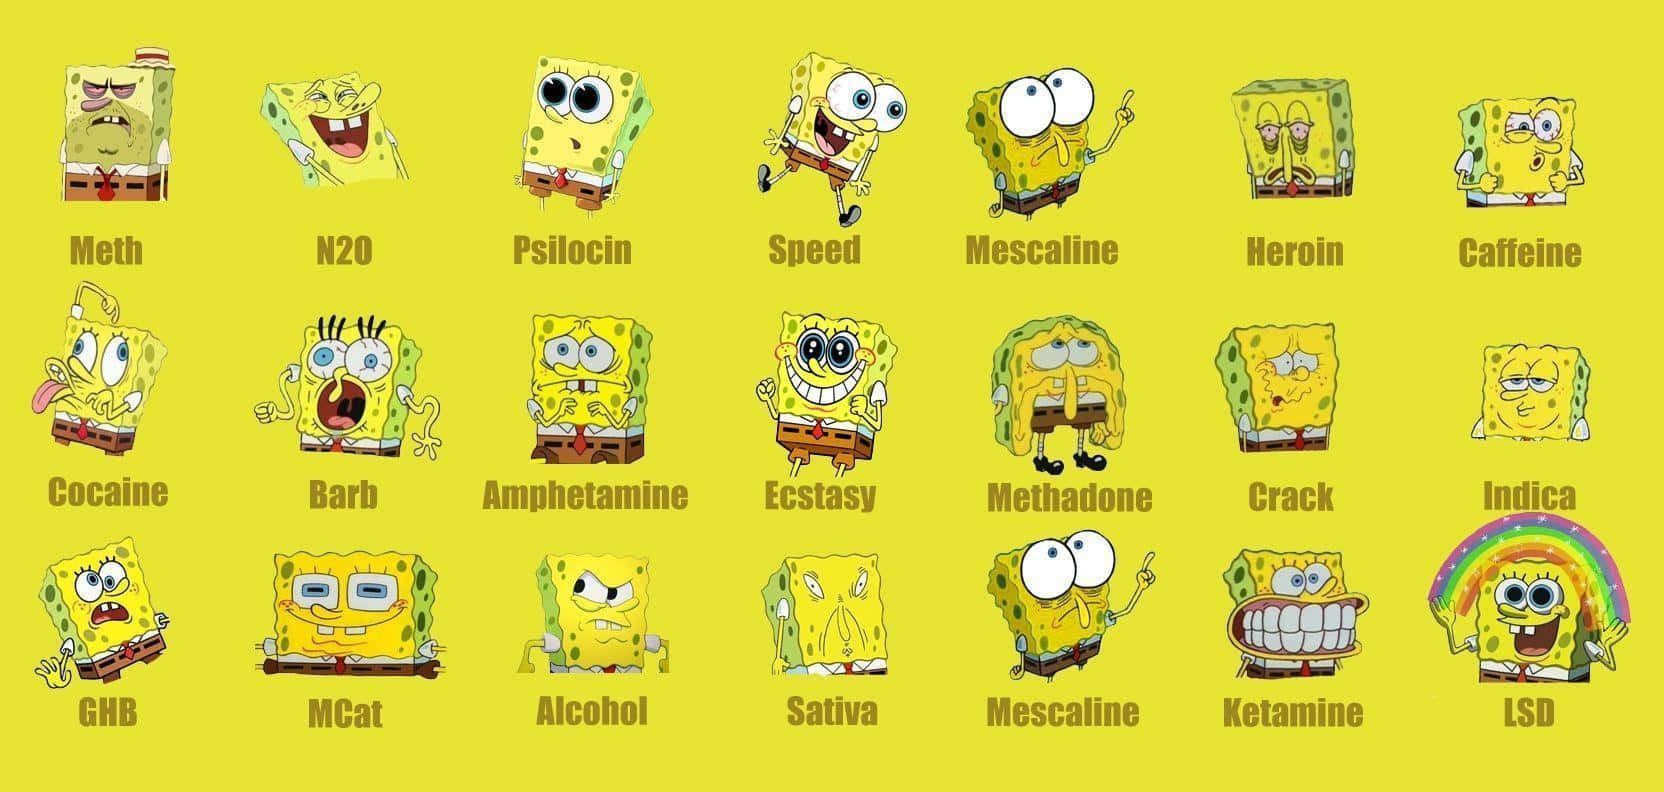 Funny Spongebob's silly faces